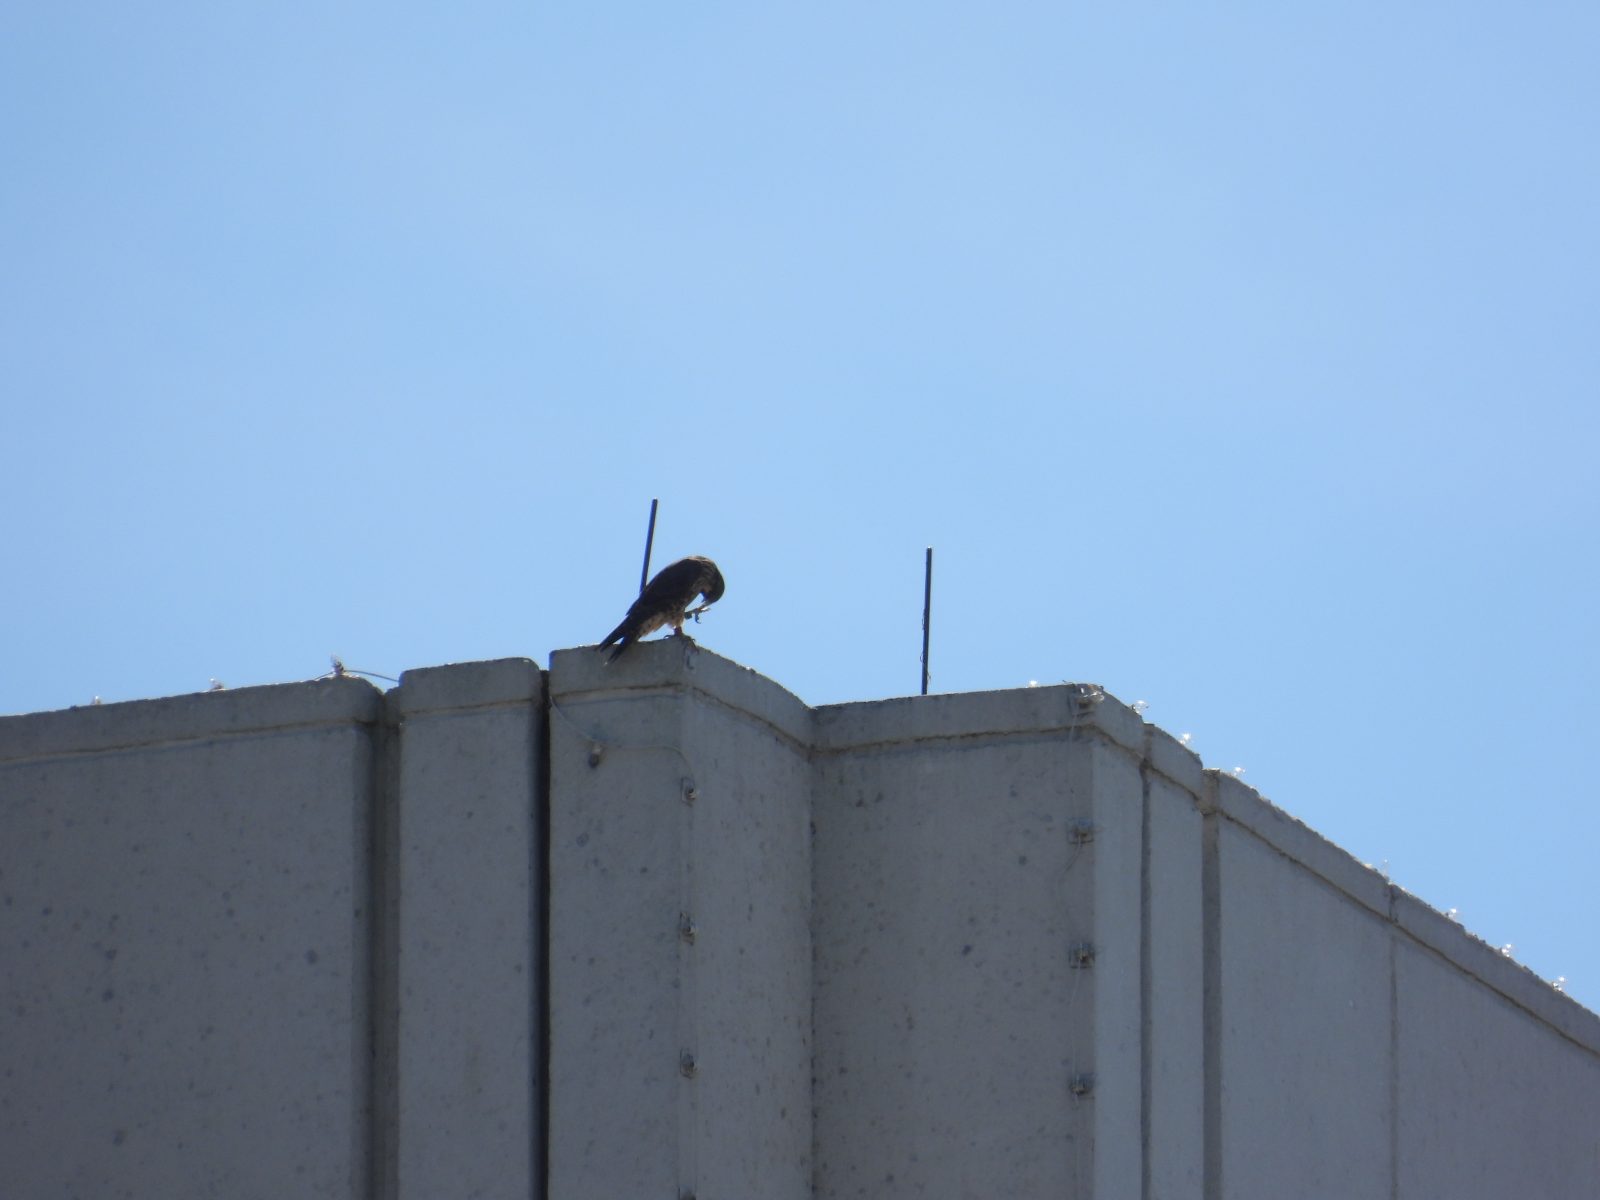 'Red' shortly after feeding on a prey item atop the Bank of America building.